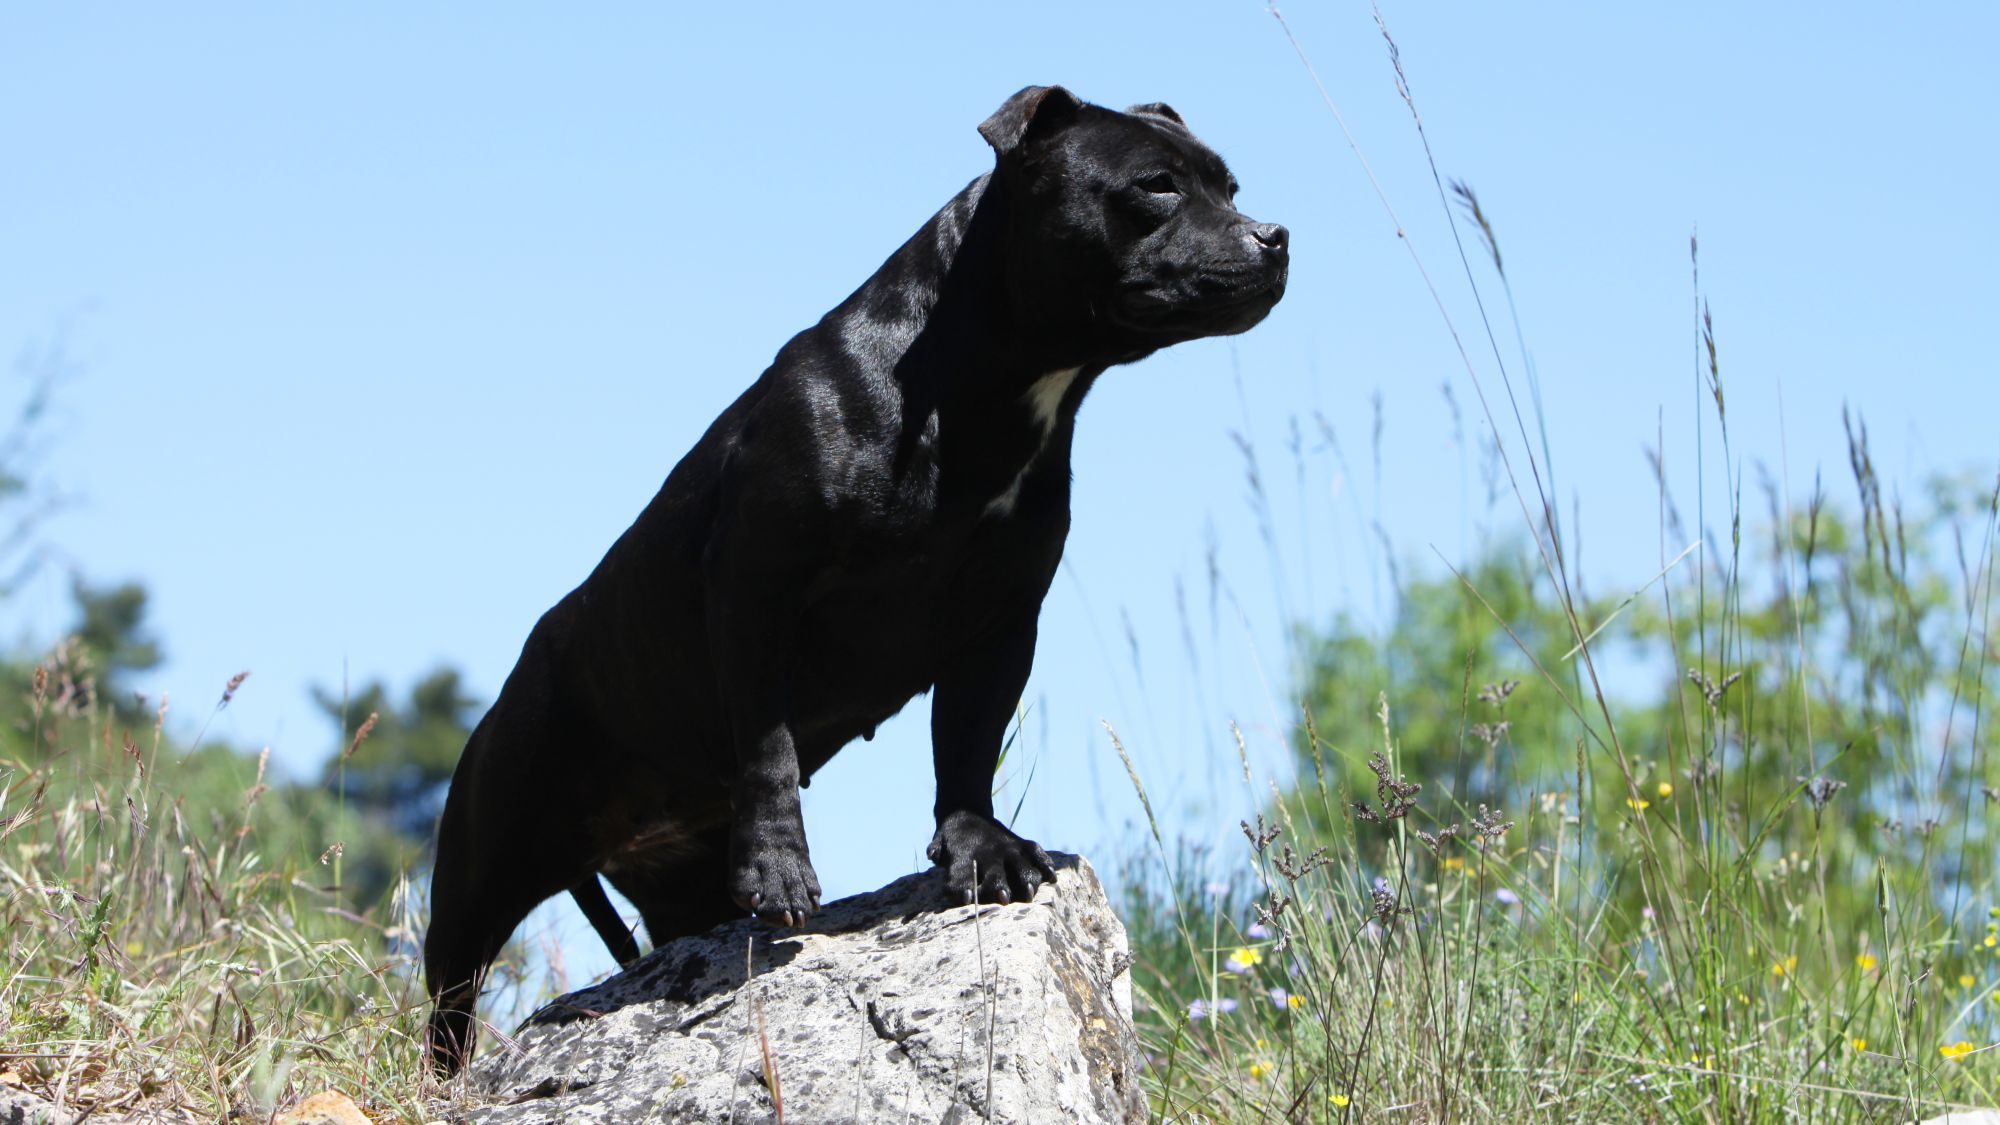 Black Staffordshire Bull Terrier standing on a rock